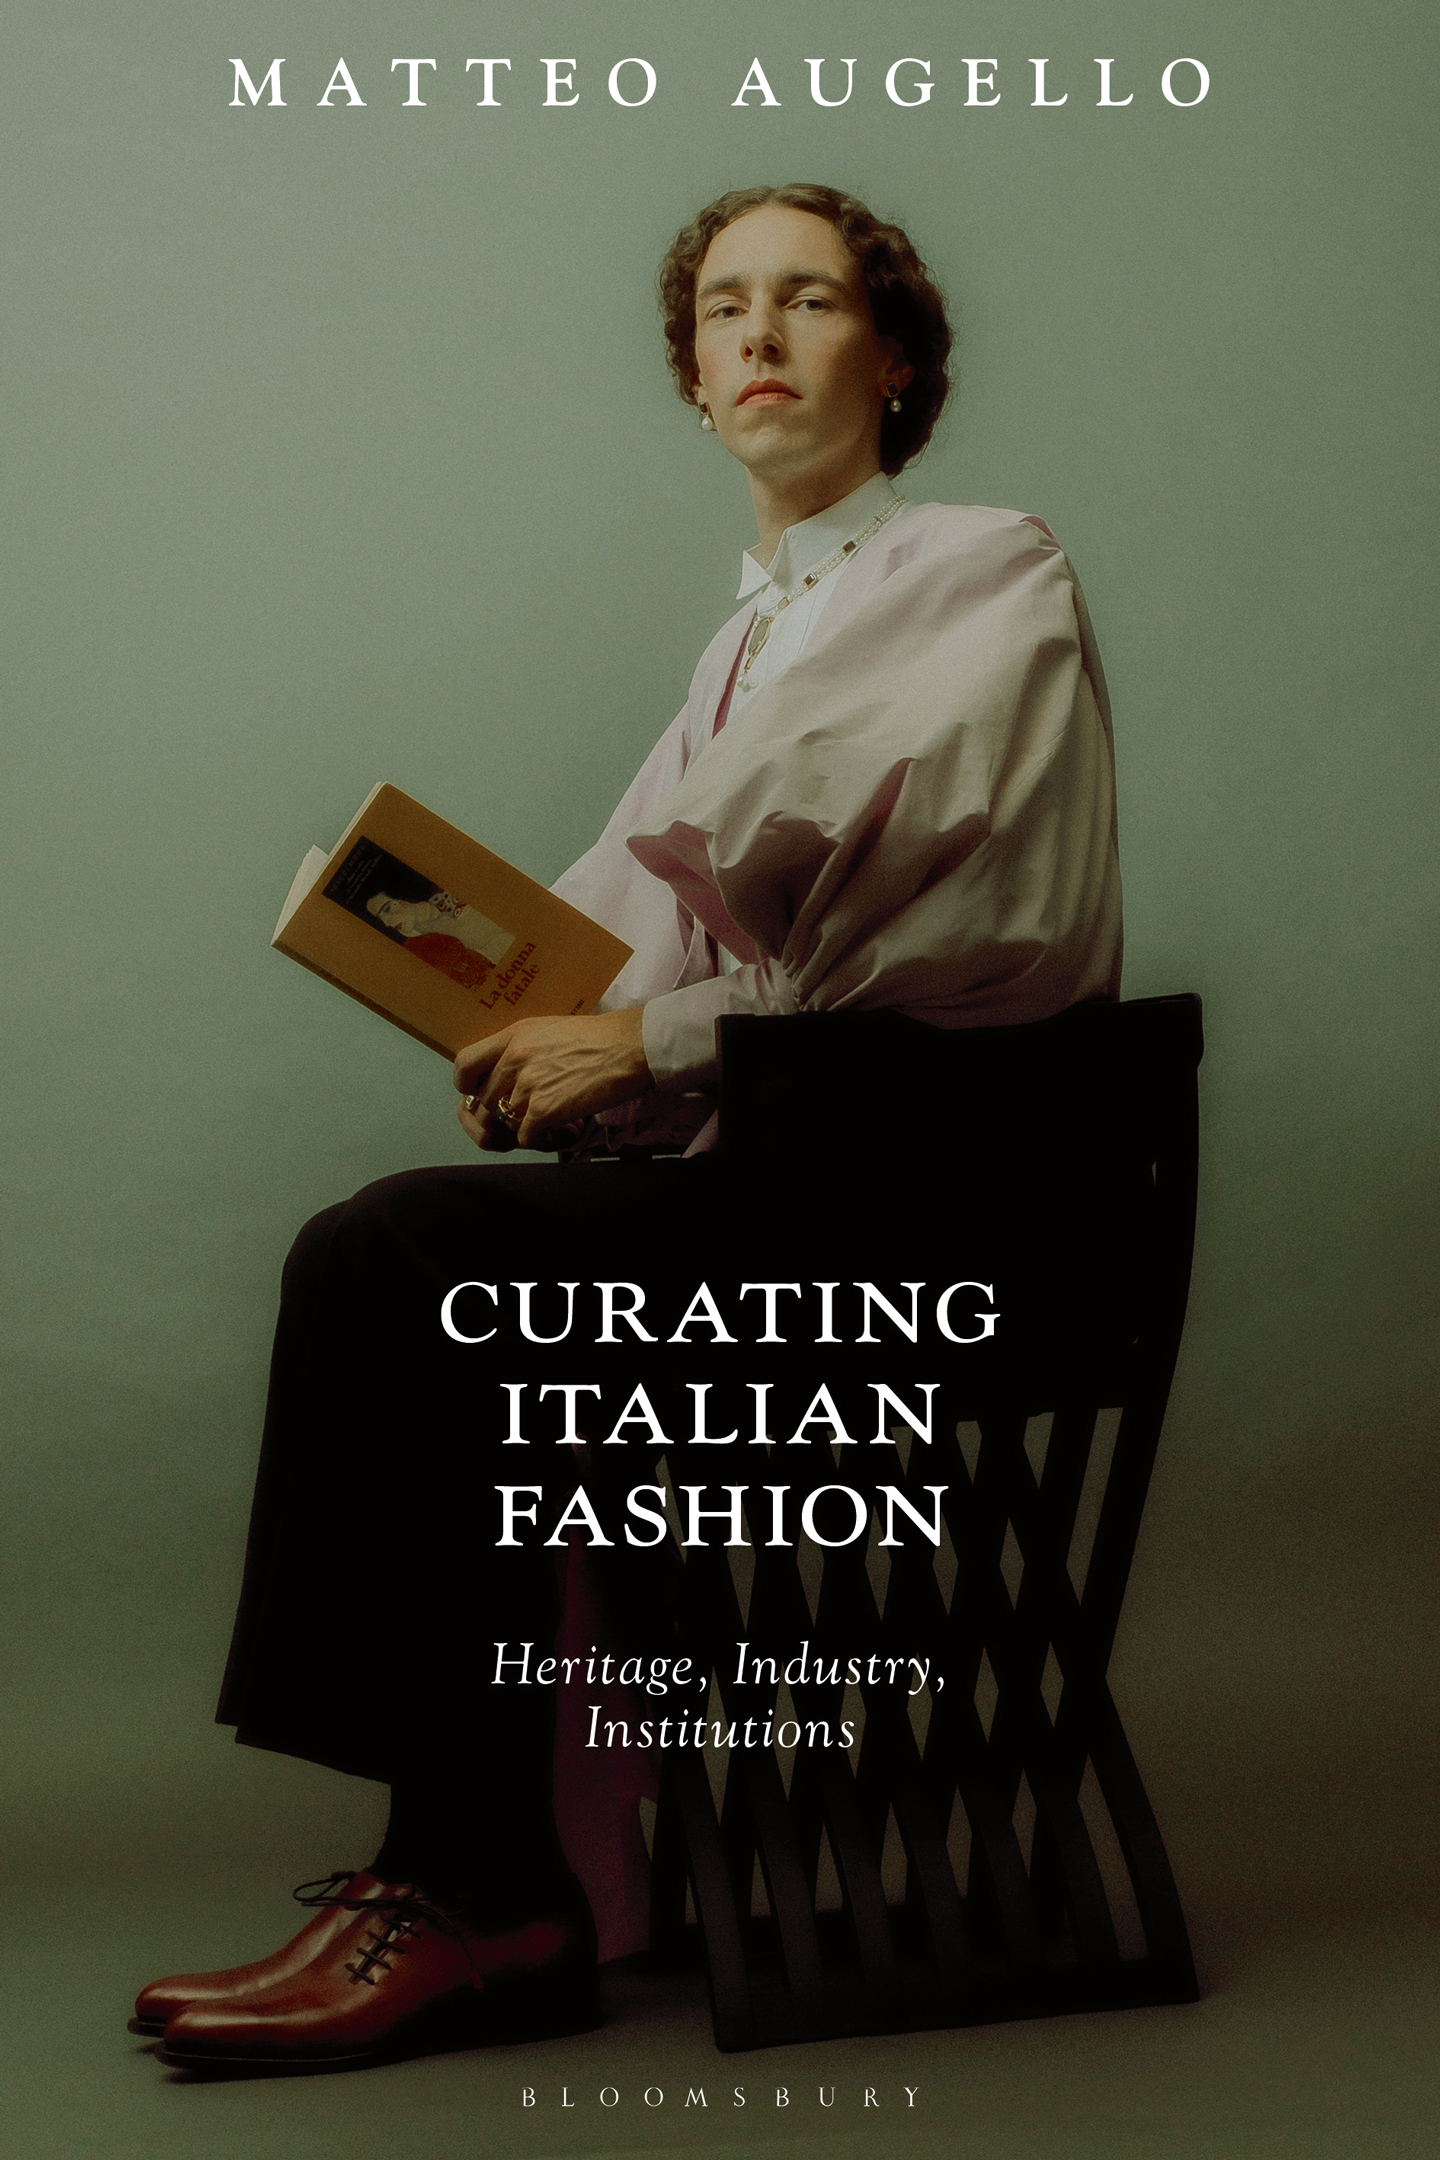 Book cover of Matteo Augello’s Curating Italian Fashion. Heritage, Industry, Institutions, published by Bloomsbury (2022). Photo courtesy of Daniele Fummo. All photographic material featured in this piece was taken at Istituto Marangoni London